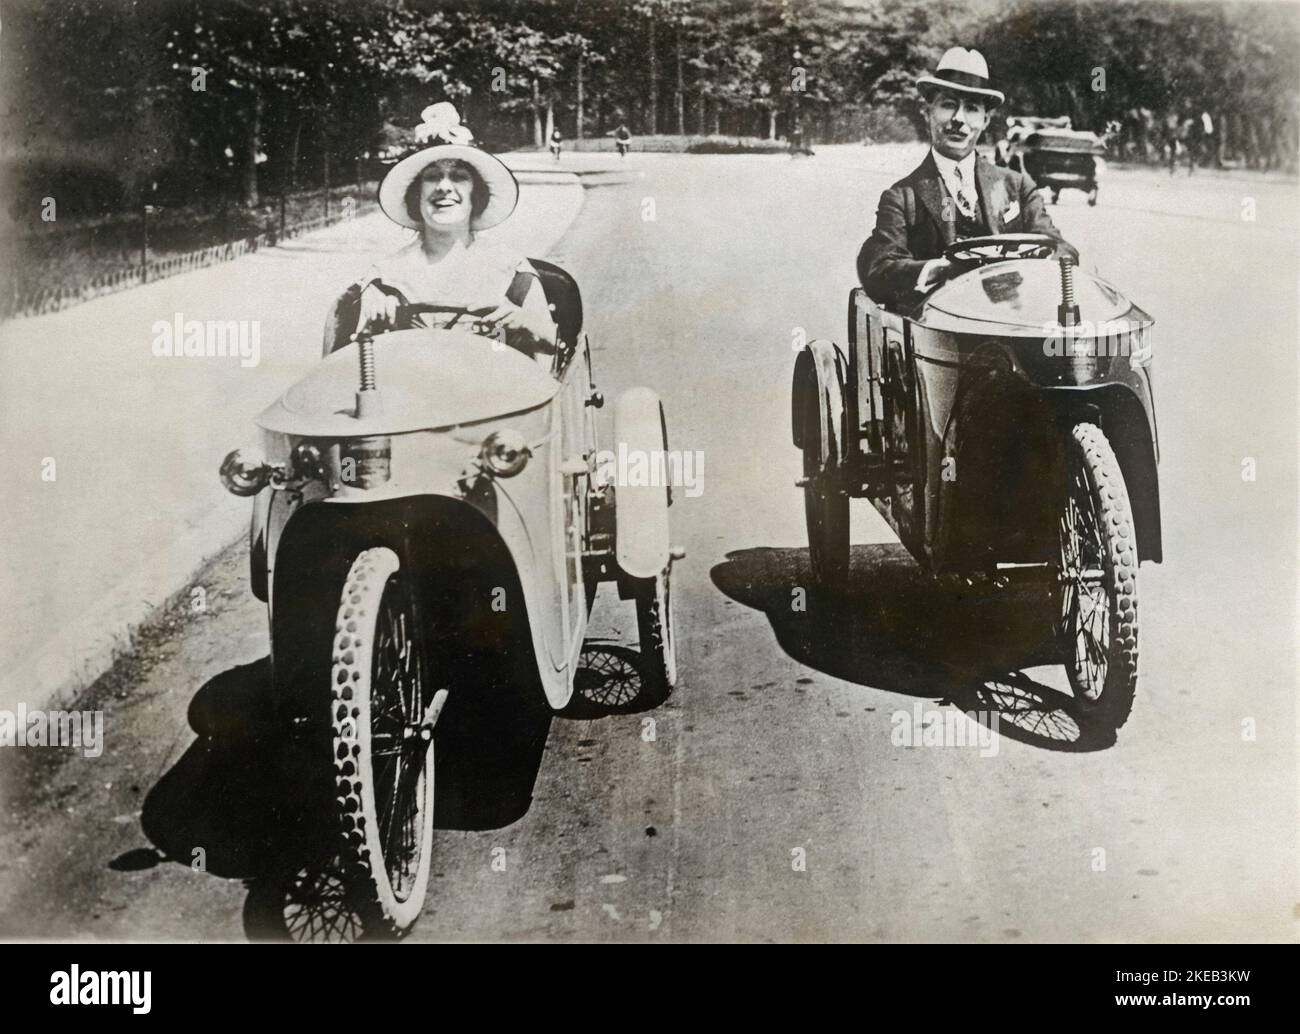 Electric vehicles in the 1930s. Jeny Golden is the star of the show in theatre Casino de Paris. She is pictured driving an electric three wheeld vehicle alongside a gentleman in a similar model. This happened in a Paris street in the 1930s. Stock Photo